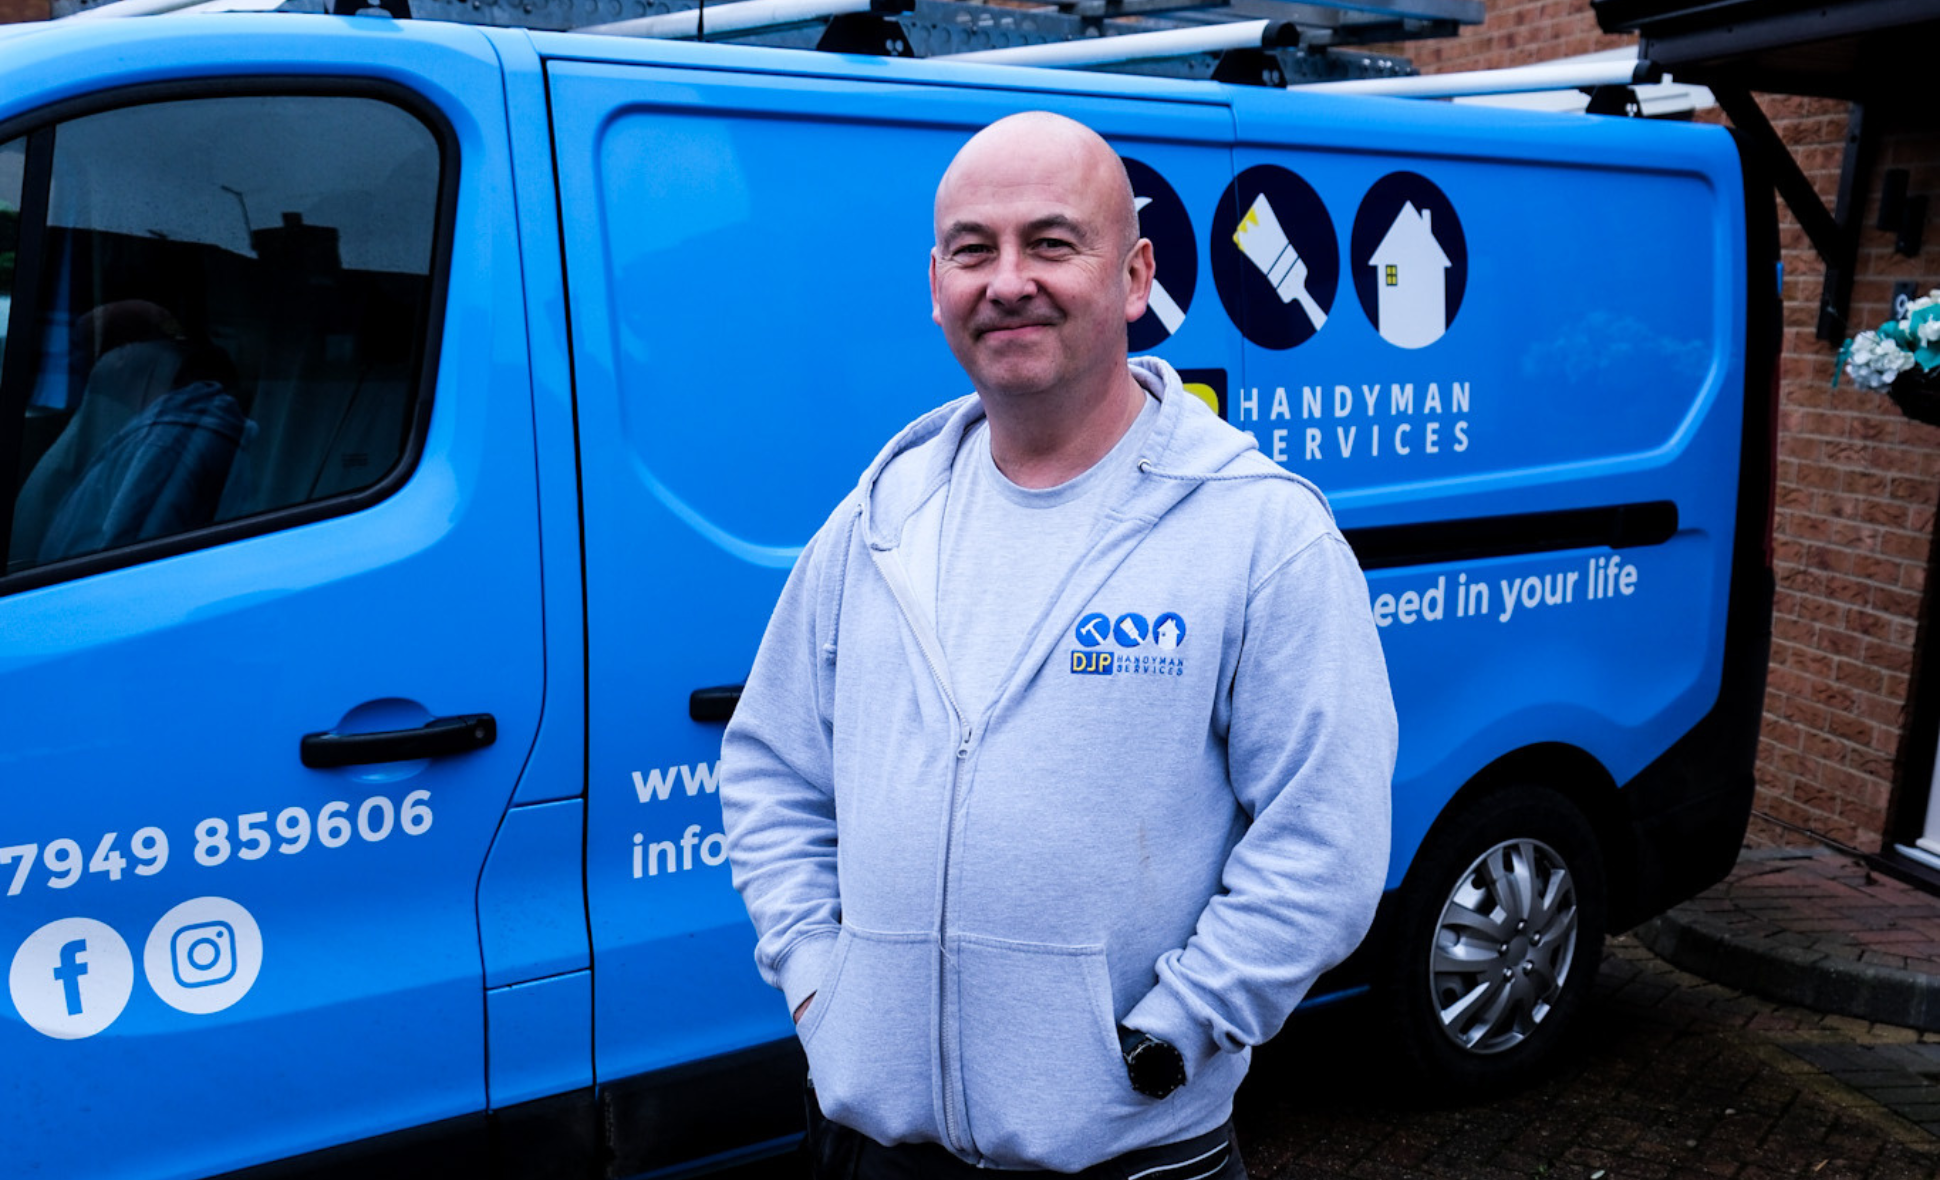 A man standing in front of a blue van